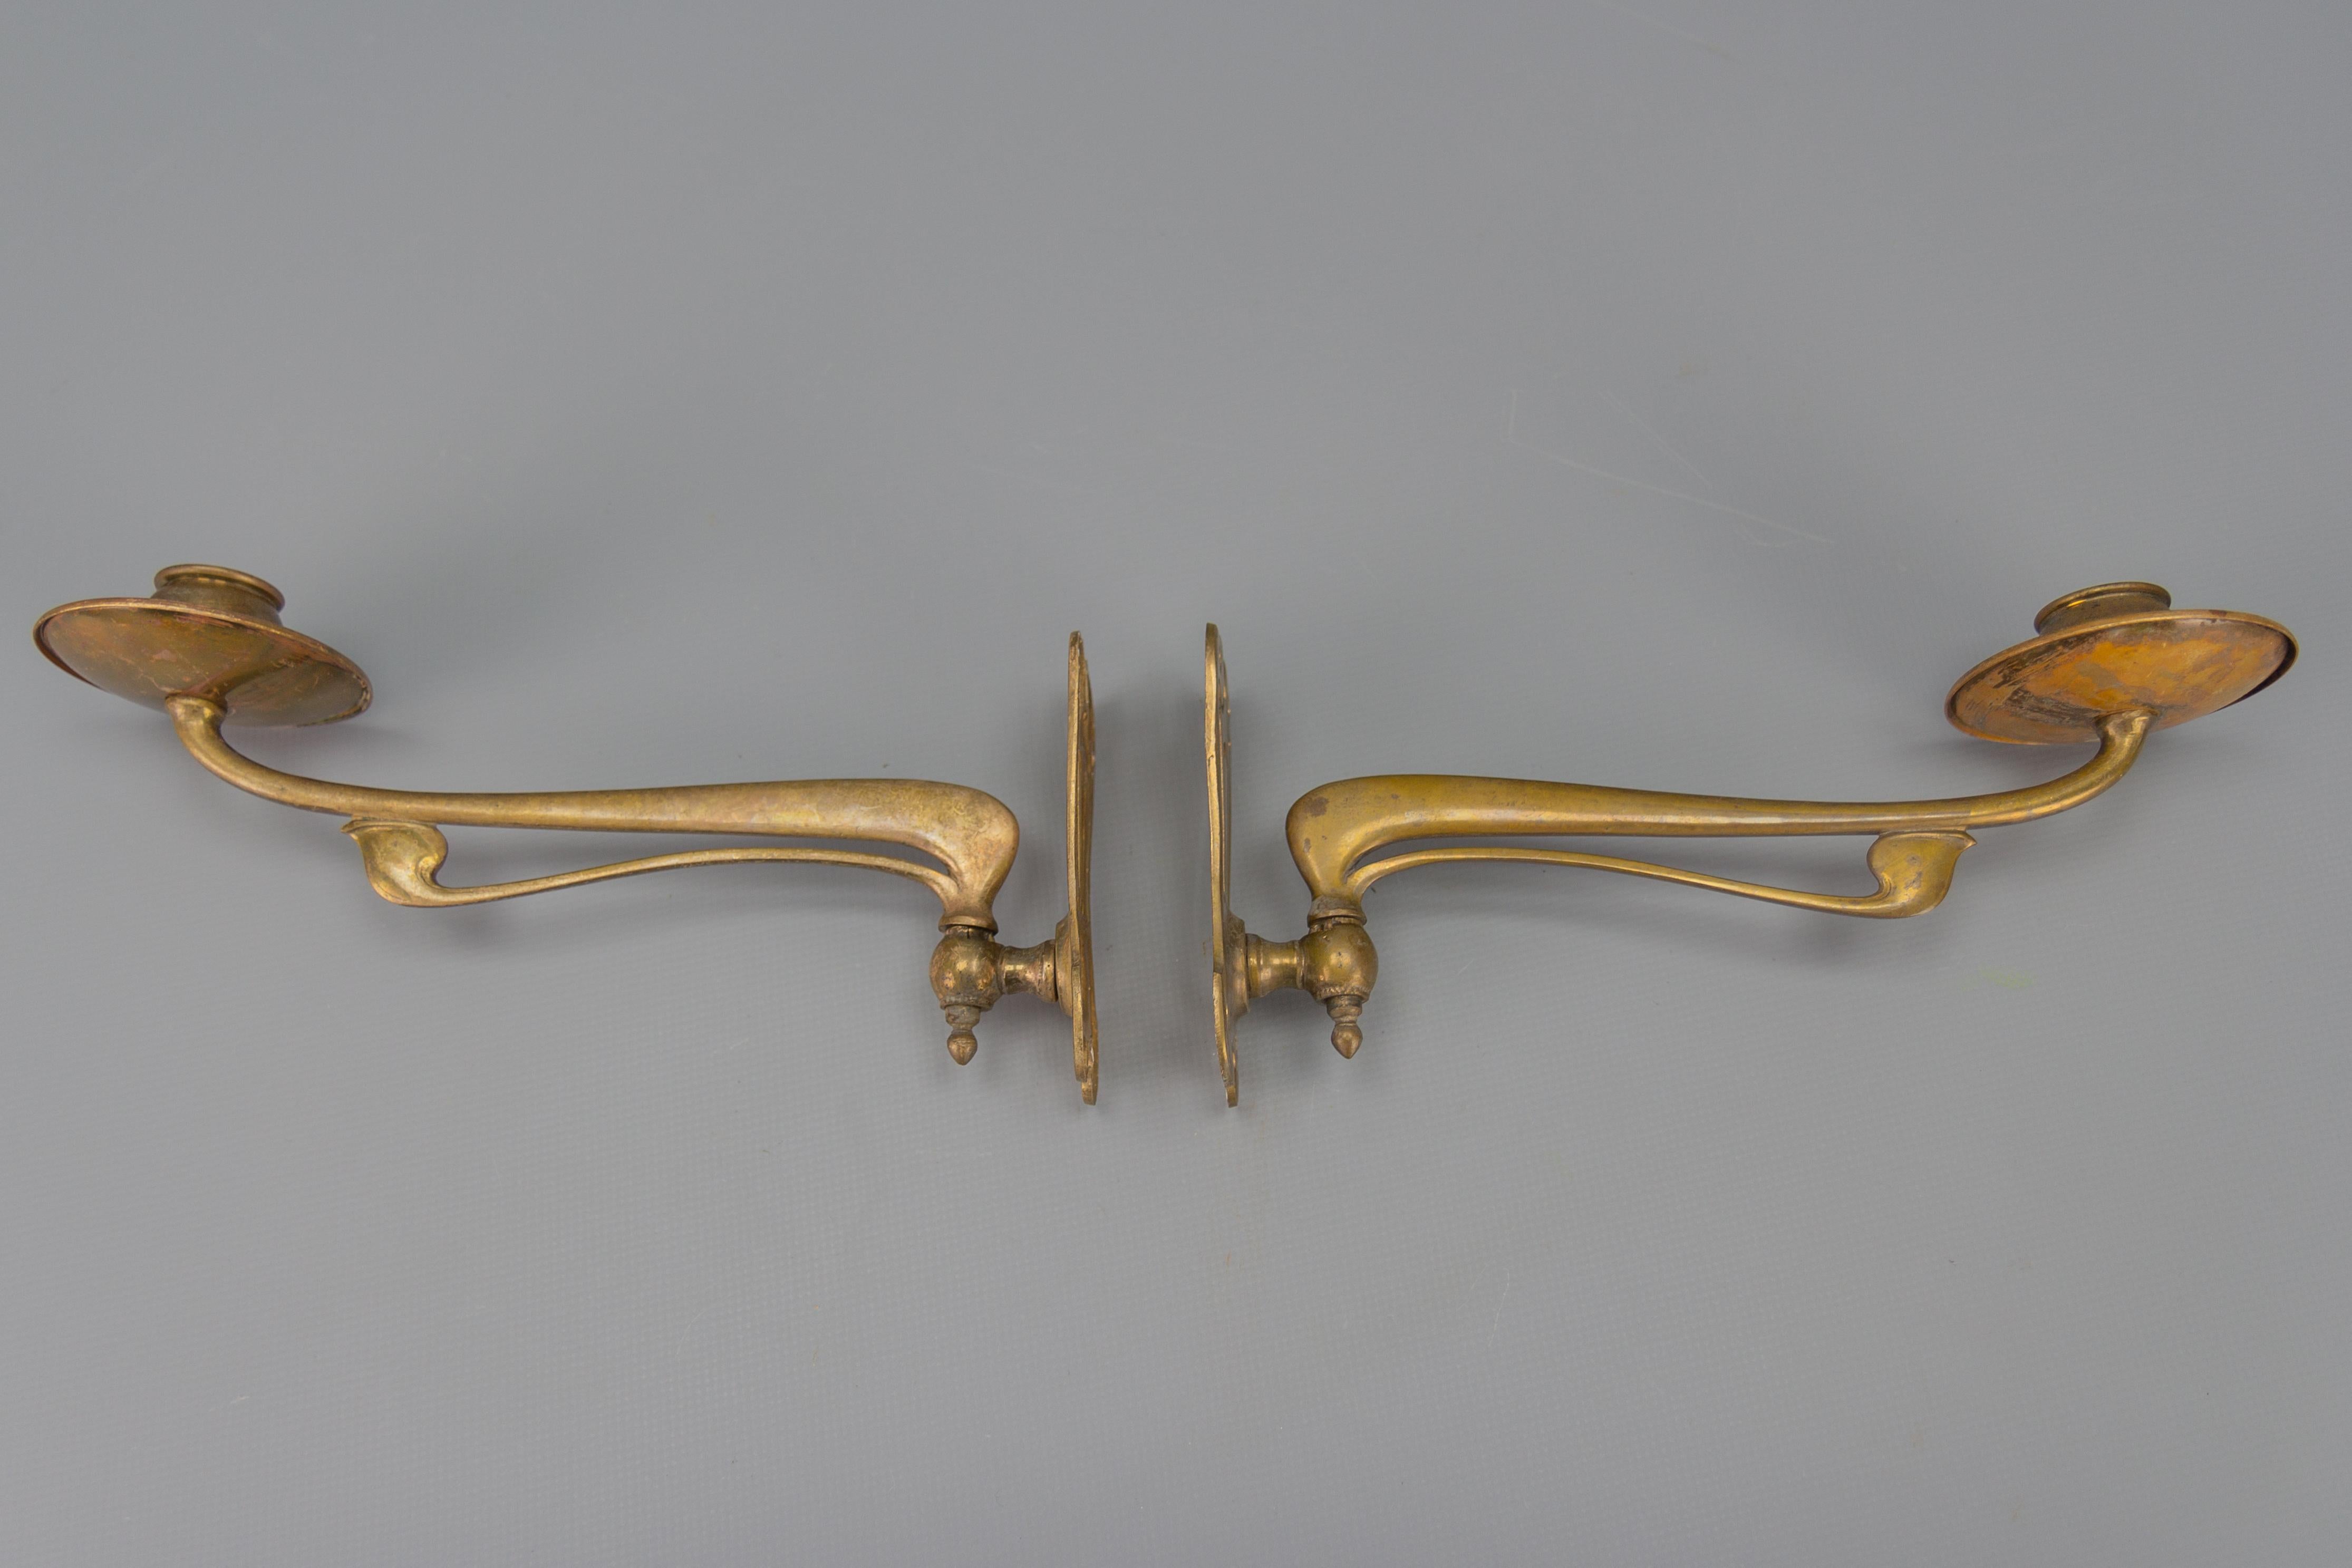 Pair of French Art Nouveau Brass Piano Wall Sconces Swivel Candle Holders, 1920 In Good Condition For Sale In Barntrup, DE